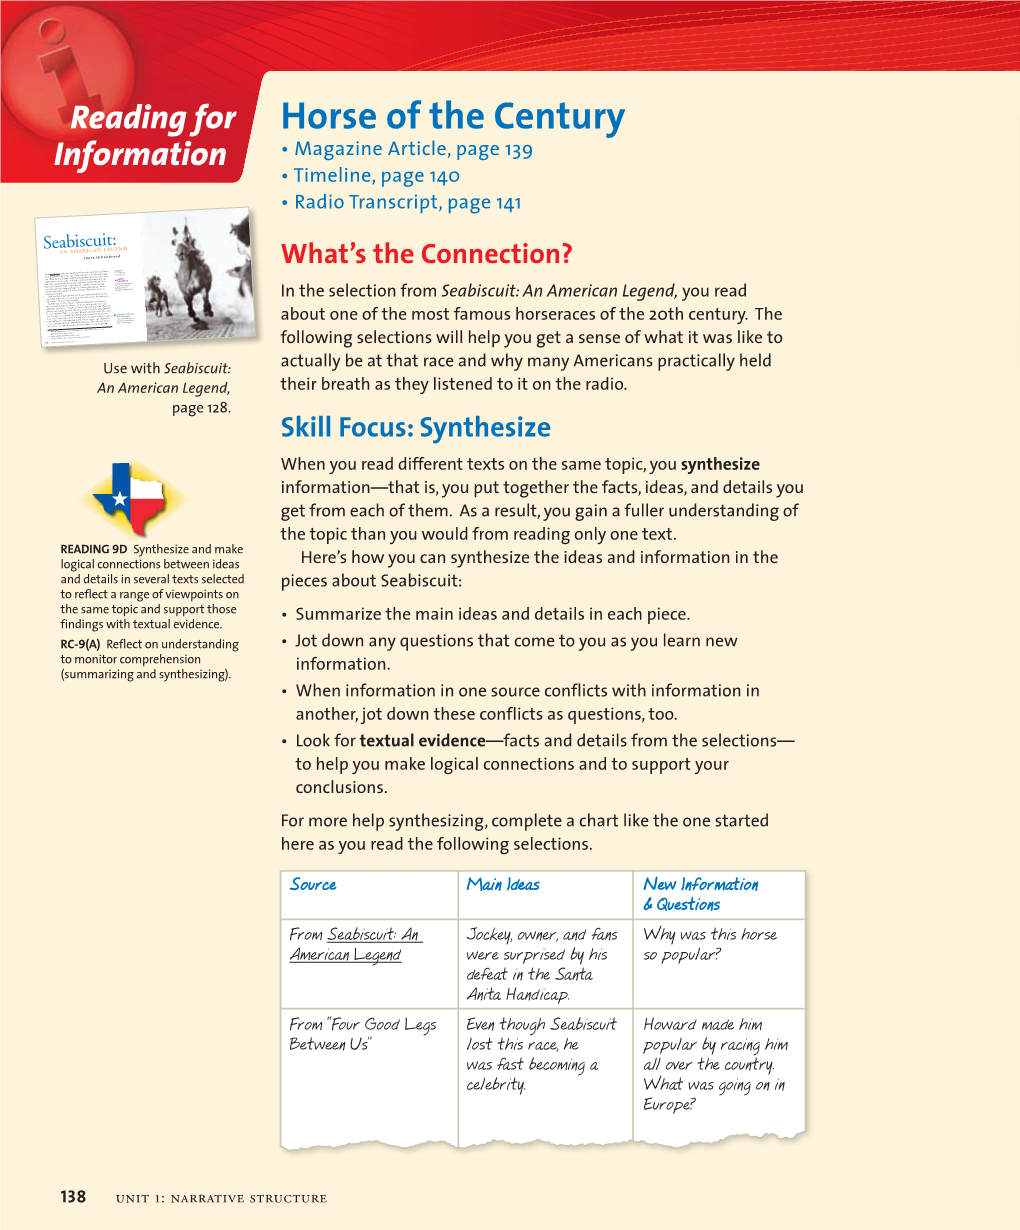 Horse of the Century Information • Magazine Article, Page 139 • Timeline, Page 140 • Radio Transcript, Page 141